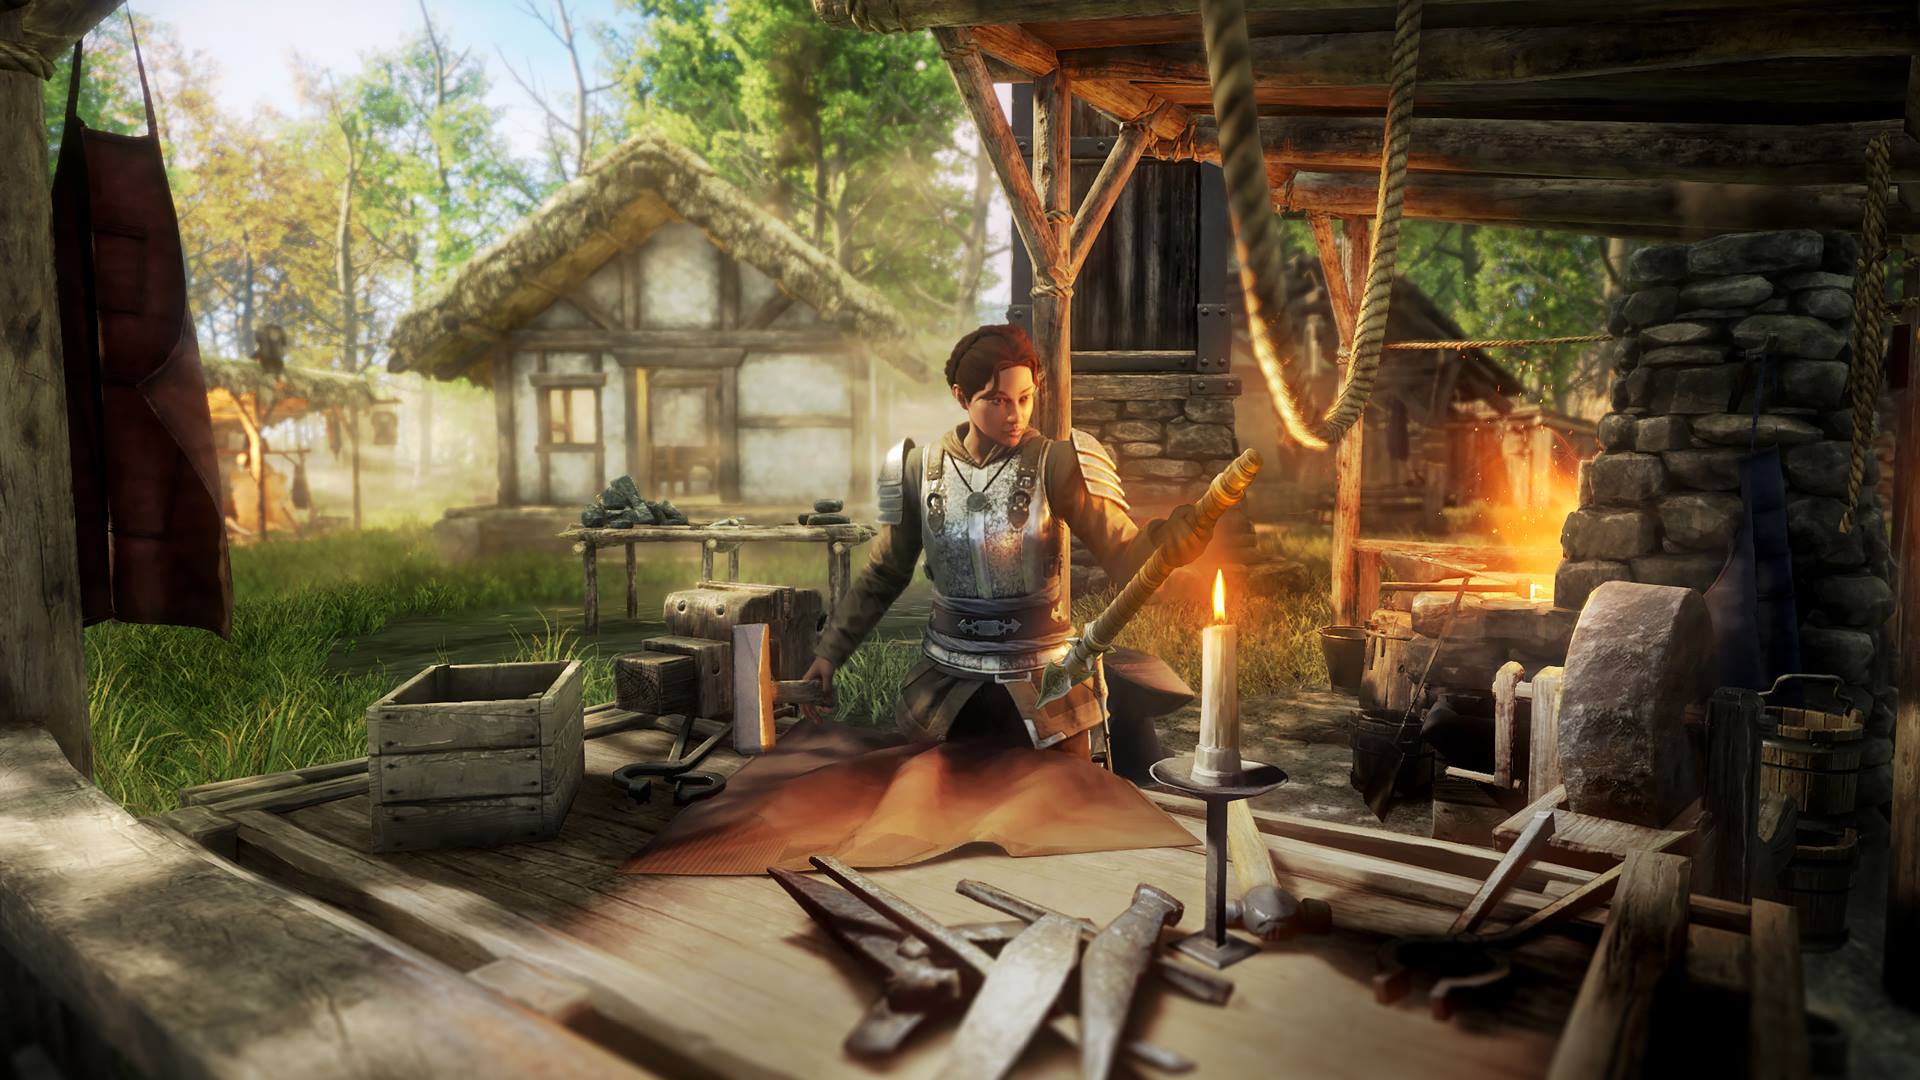 New World: Armorsmith quickly level up to 200 - Here's how